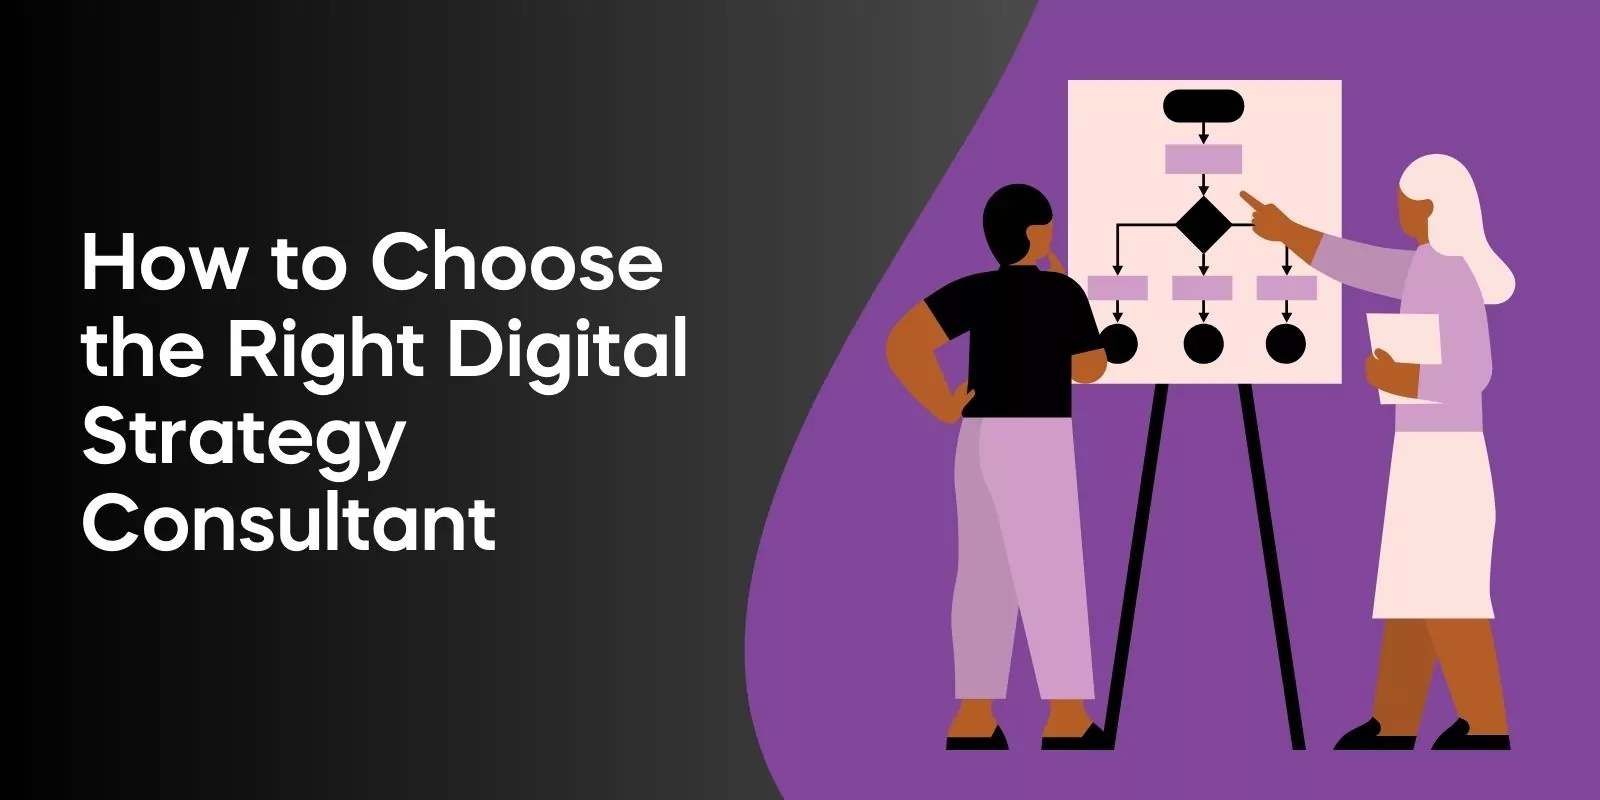 How to Choose the Right Digital Strategy Consultant